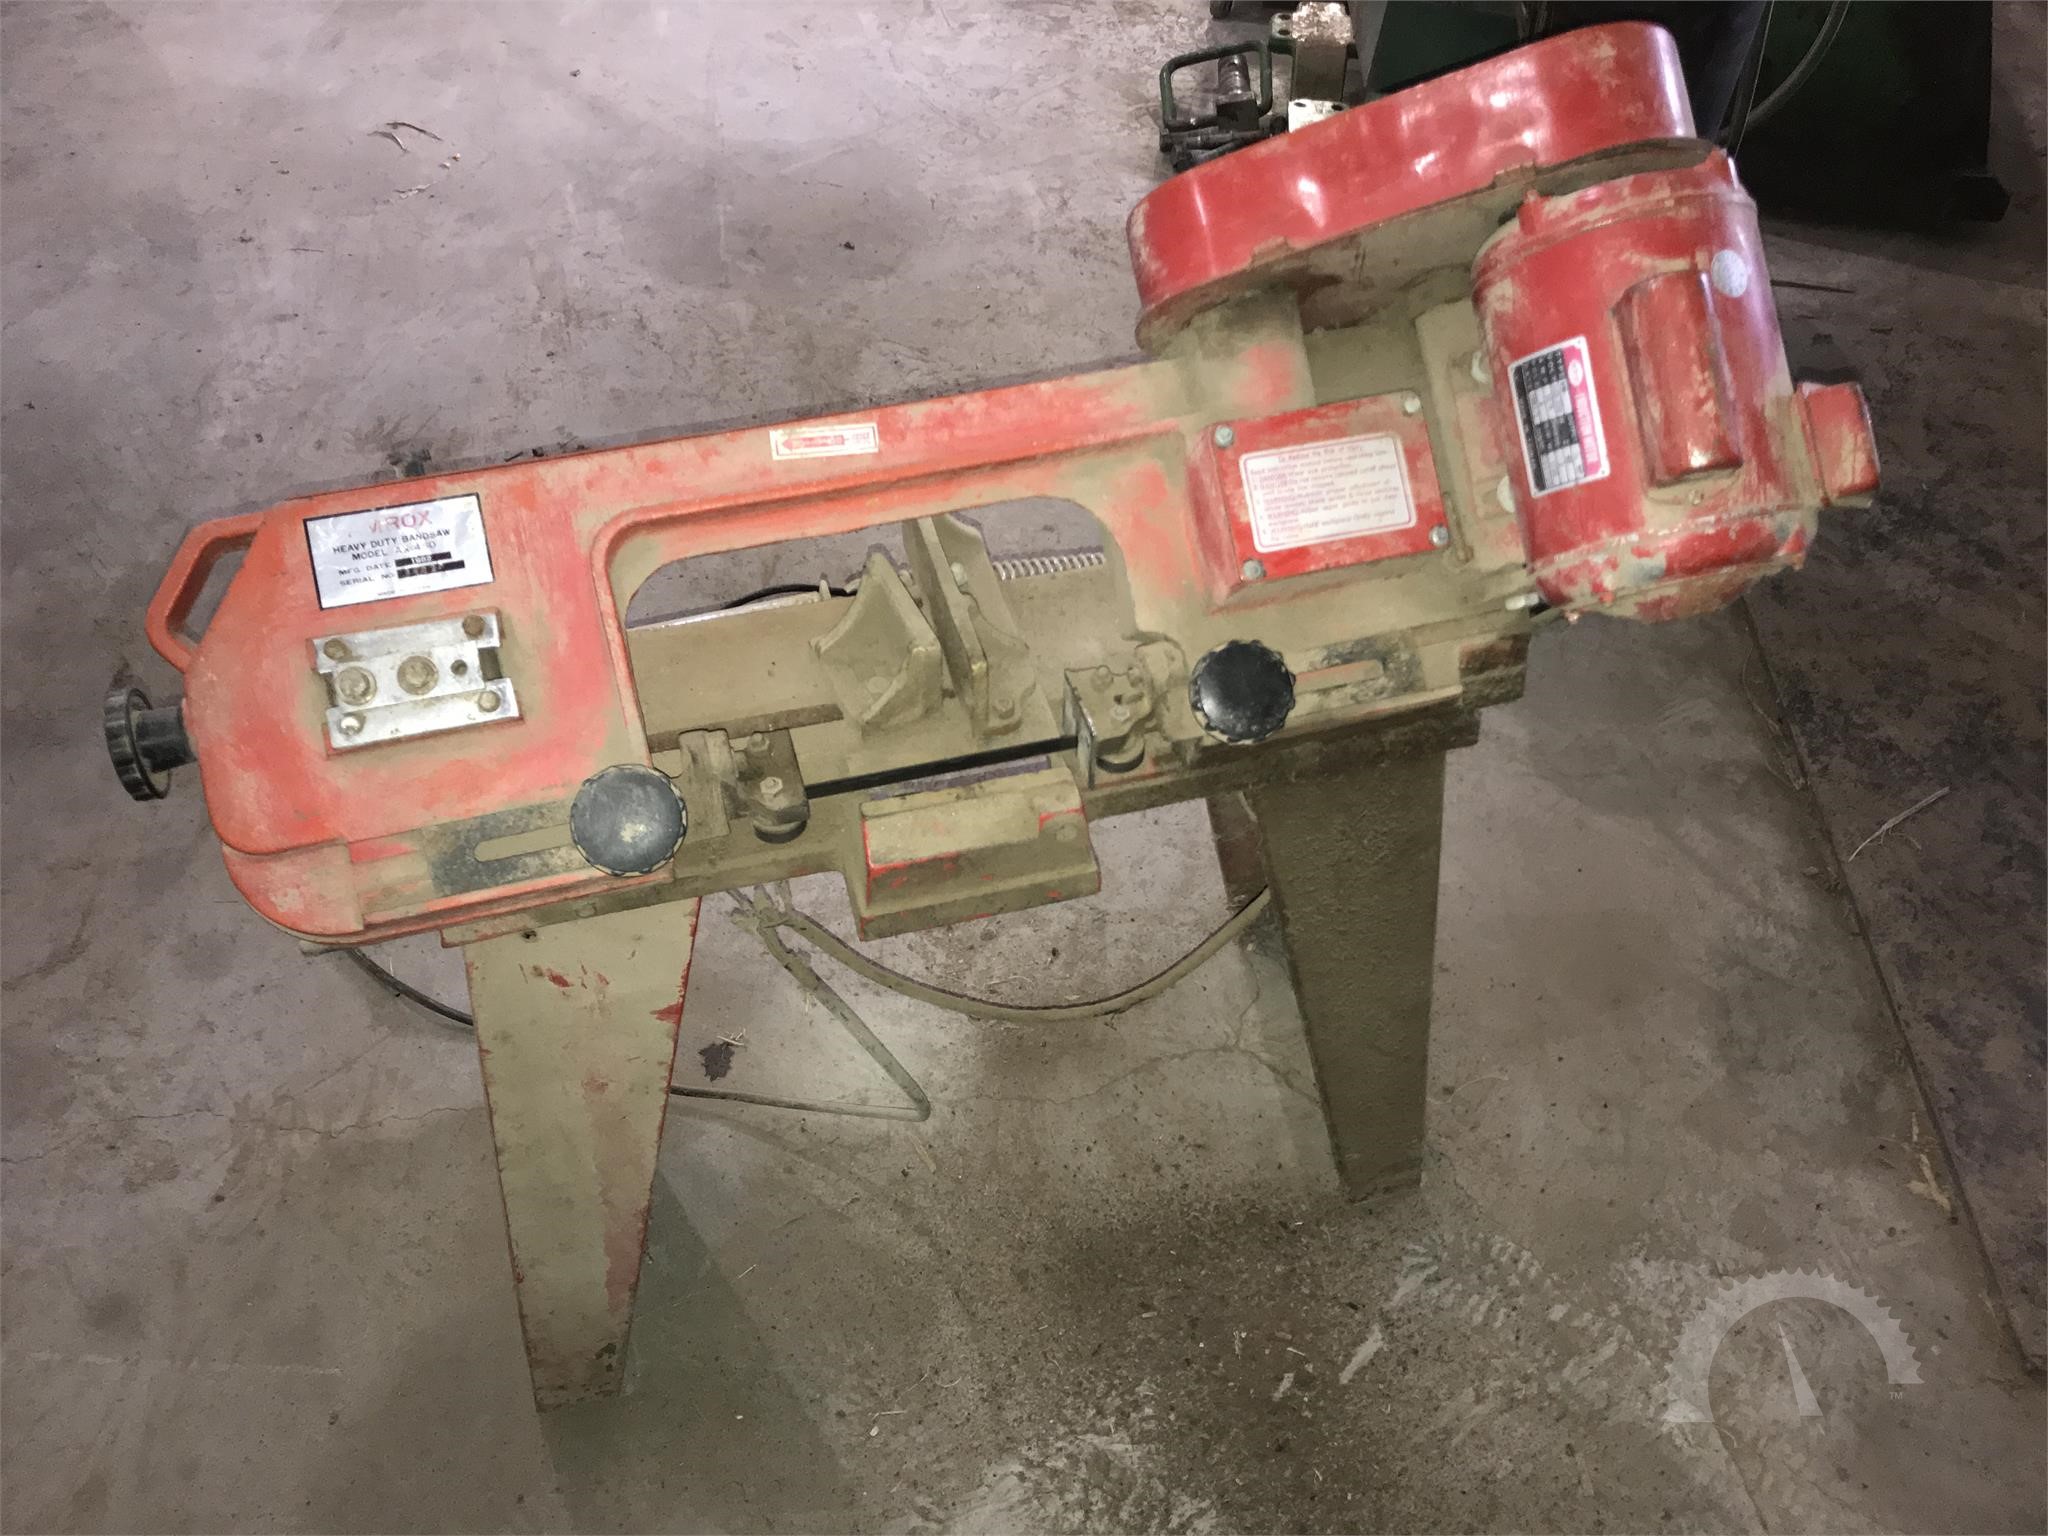 Amrox Saws / Drills Shop / Warehouse Auction Results - 1 Listings 